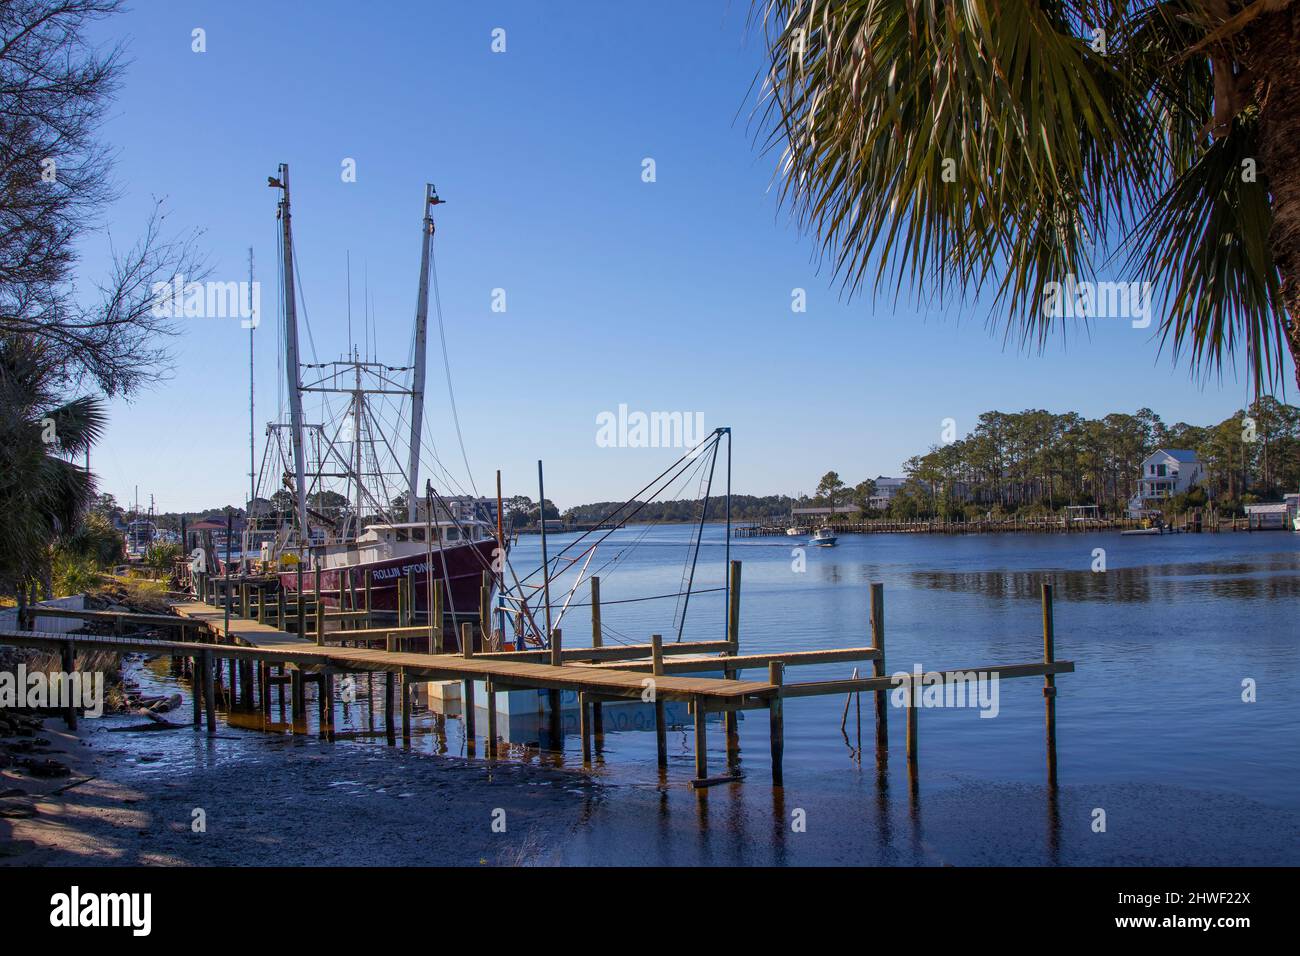 Shrimp boat in the harbor of Carrabelle, Florida Stock Photo